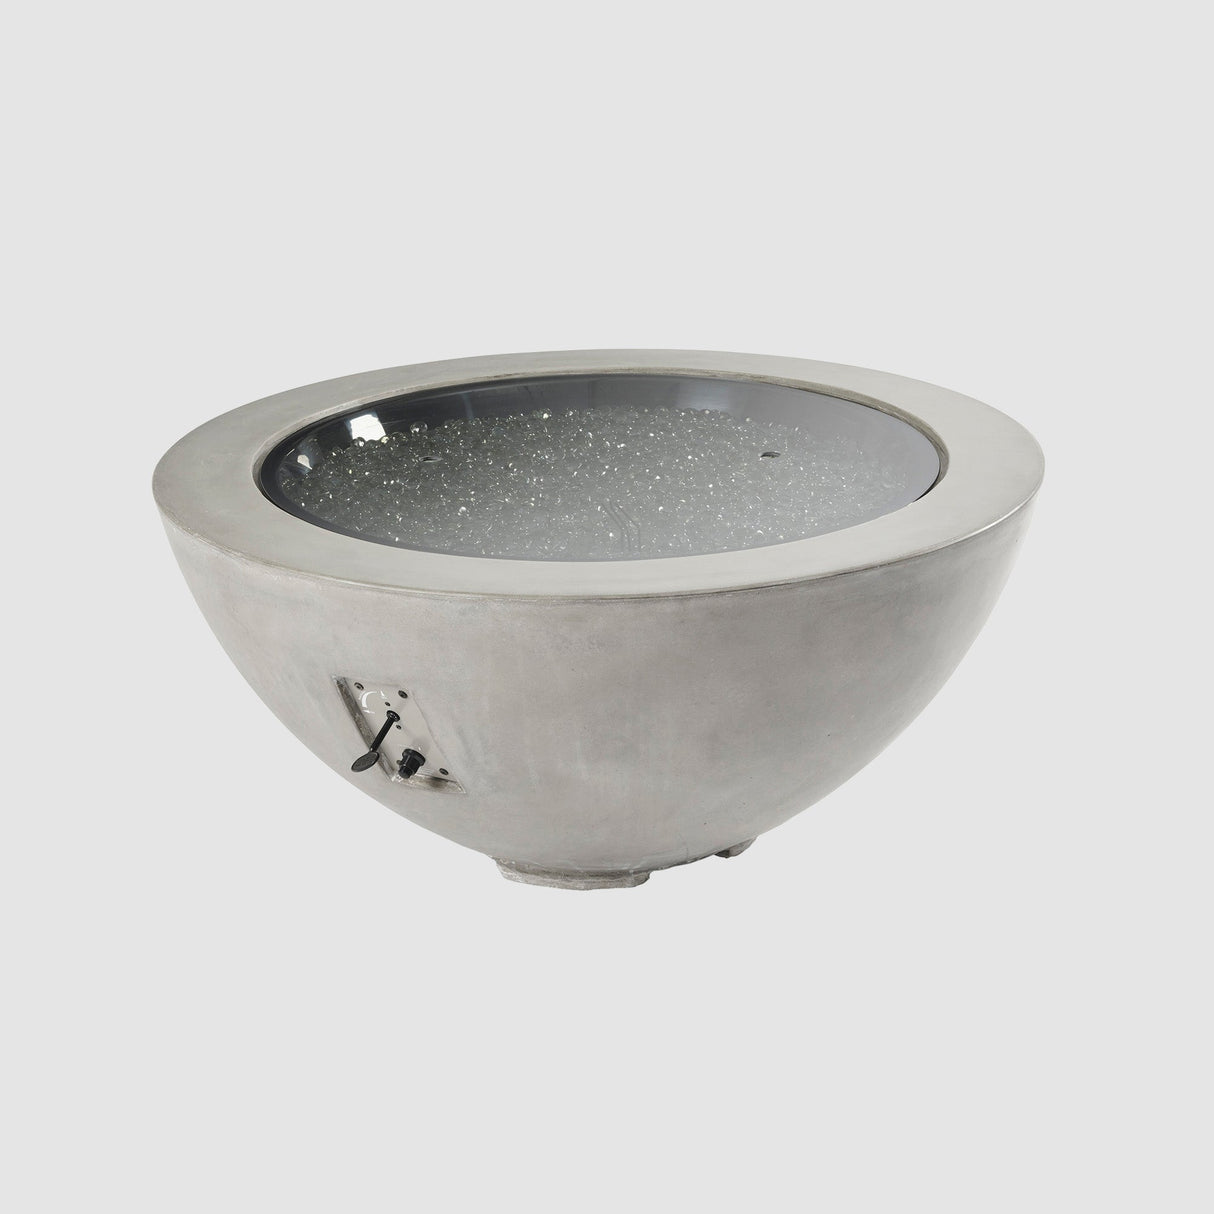 A cover placed on the burner of a Natural Grey Cove Round Gas Fire Pit Bowl 42"